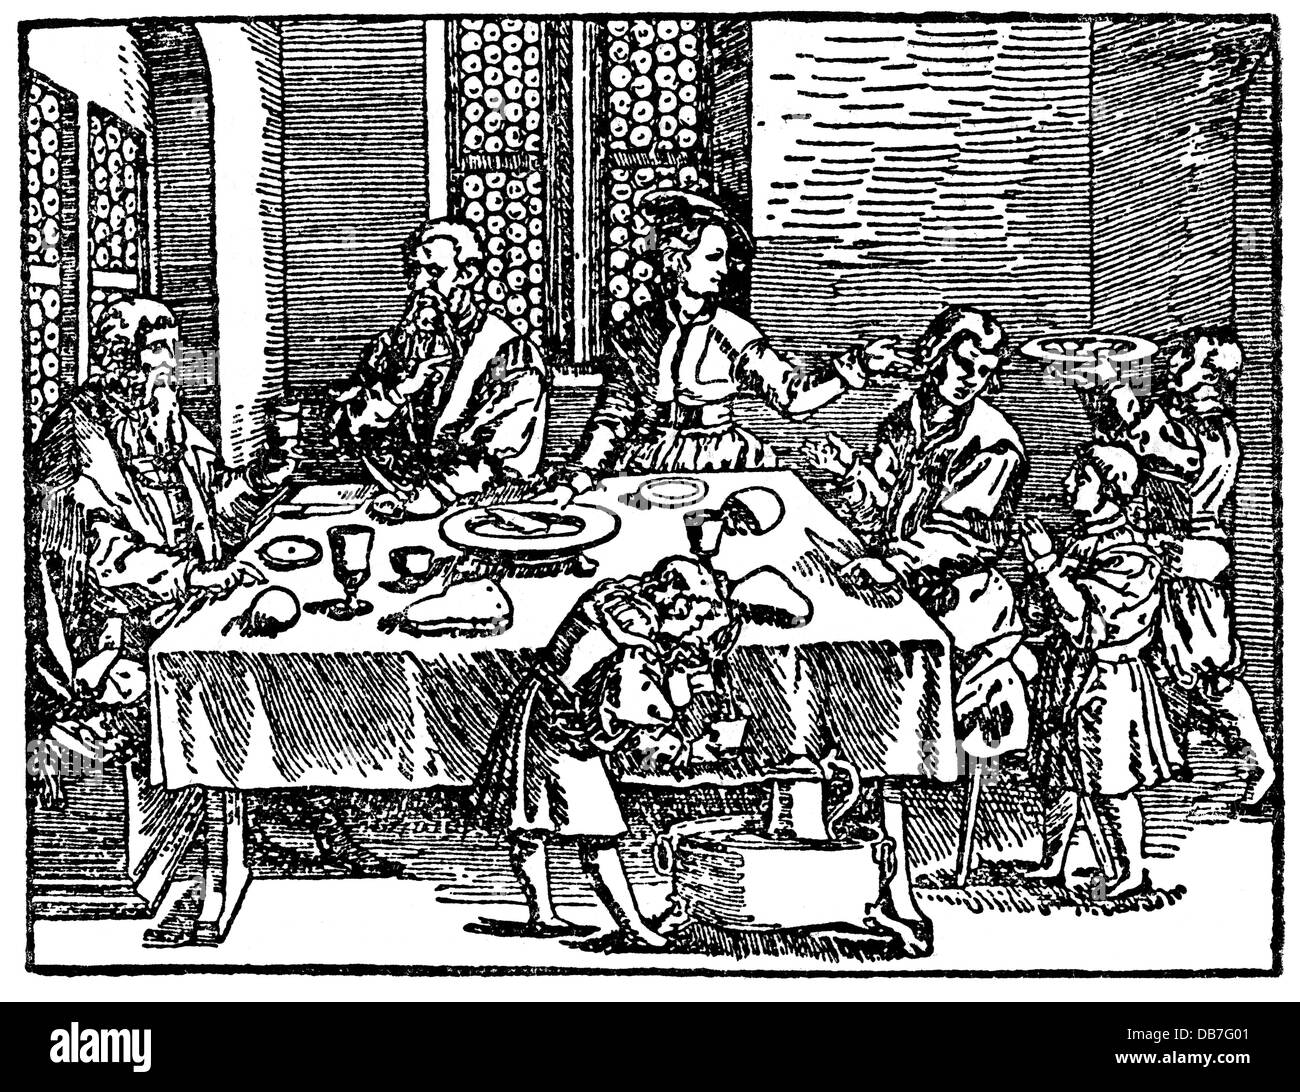 gastronomy, meals, feast, woodcut, 16th century, 16th century, graphic, graphics, half length, sitting, sit, dinner table, dinner tables, table cloth, tablecloth, table cloths, tablecloths, plate, plates, mug, cup, mugs, cups, meal, meals, dinner, eating, eat, servant, servants, manservant, menservants, serve, serving, beverage, beverages, drink, drinks, pour, pouring, service, table manners, historic, historical, people, Additional-Rights-Clearences-Not Available Stock Photo